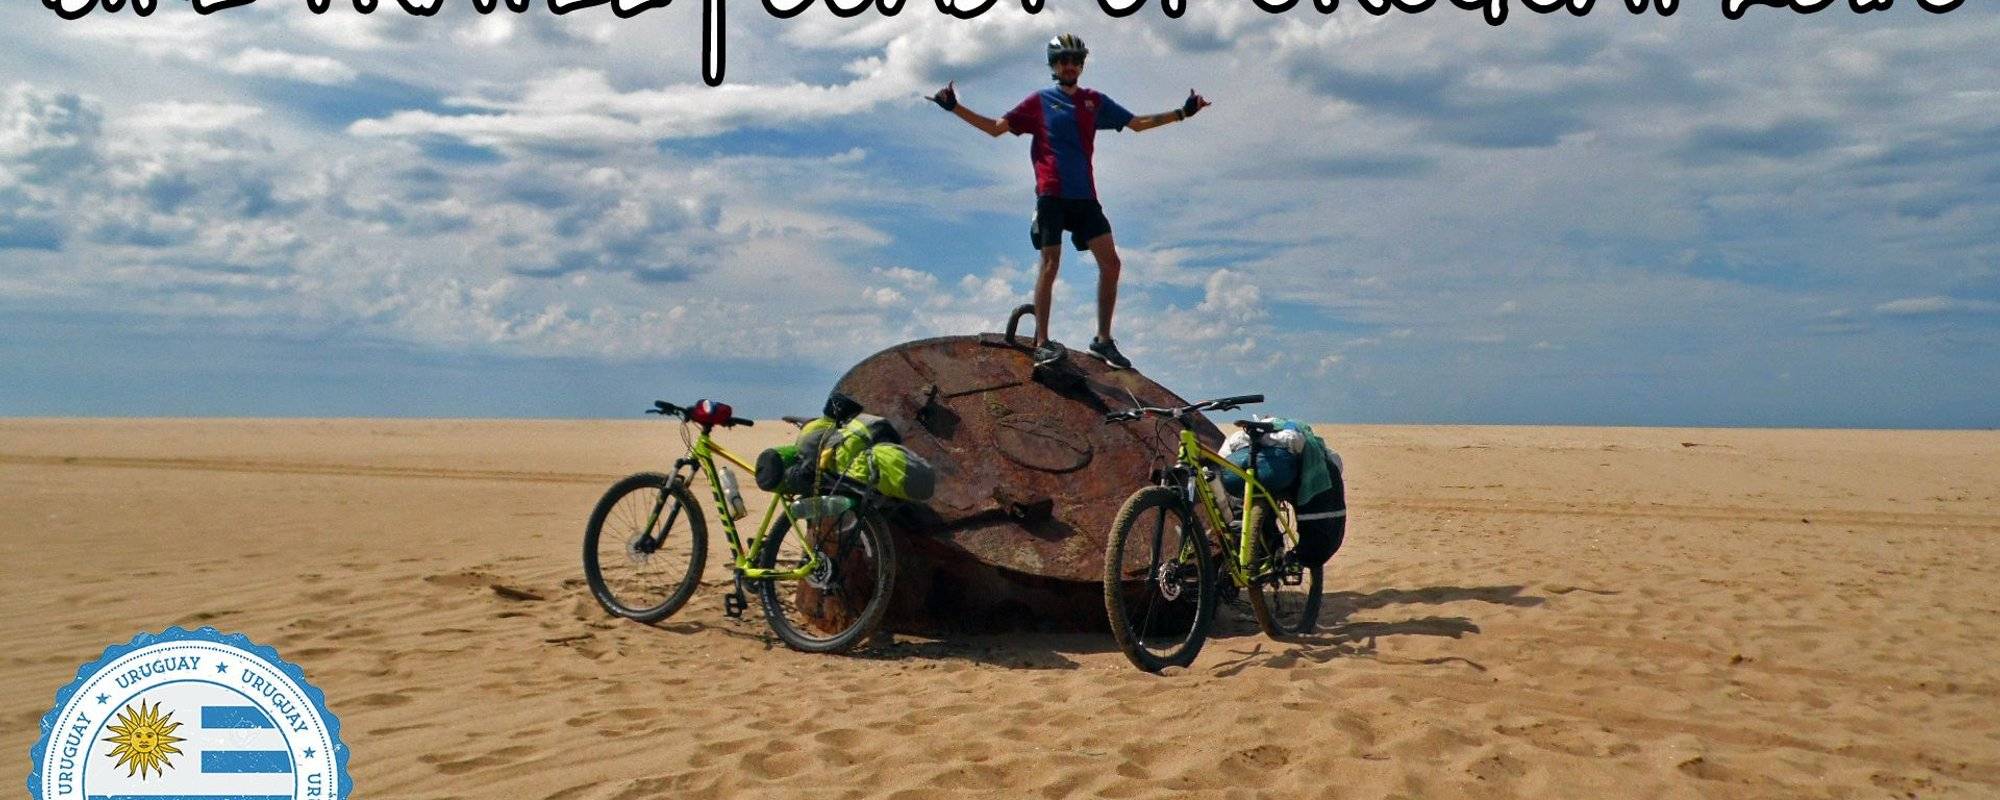 [PART 7] Travel Story: Coast of Uruguay by Bicycle | The Murphy's Law